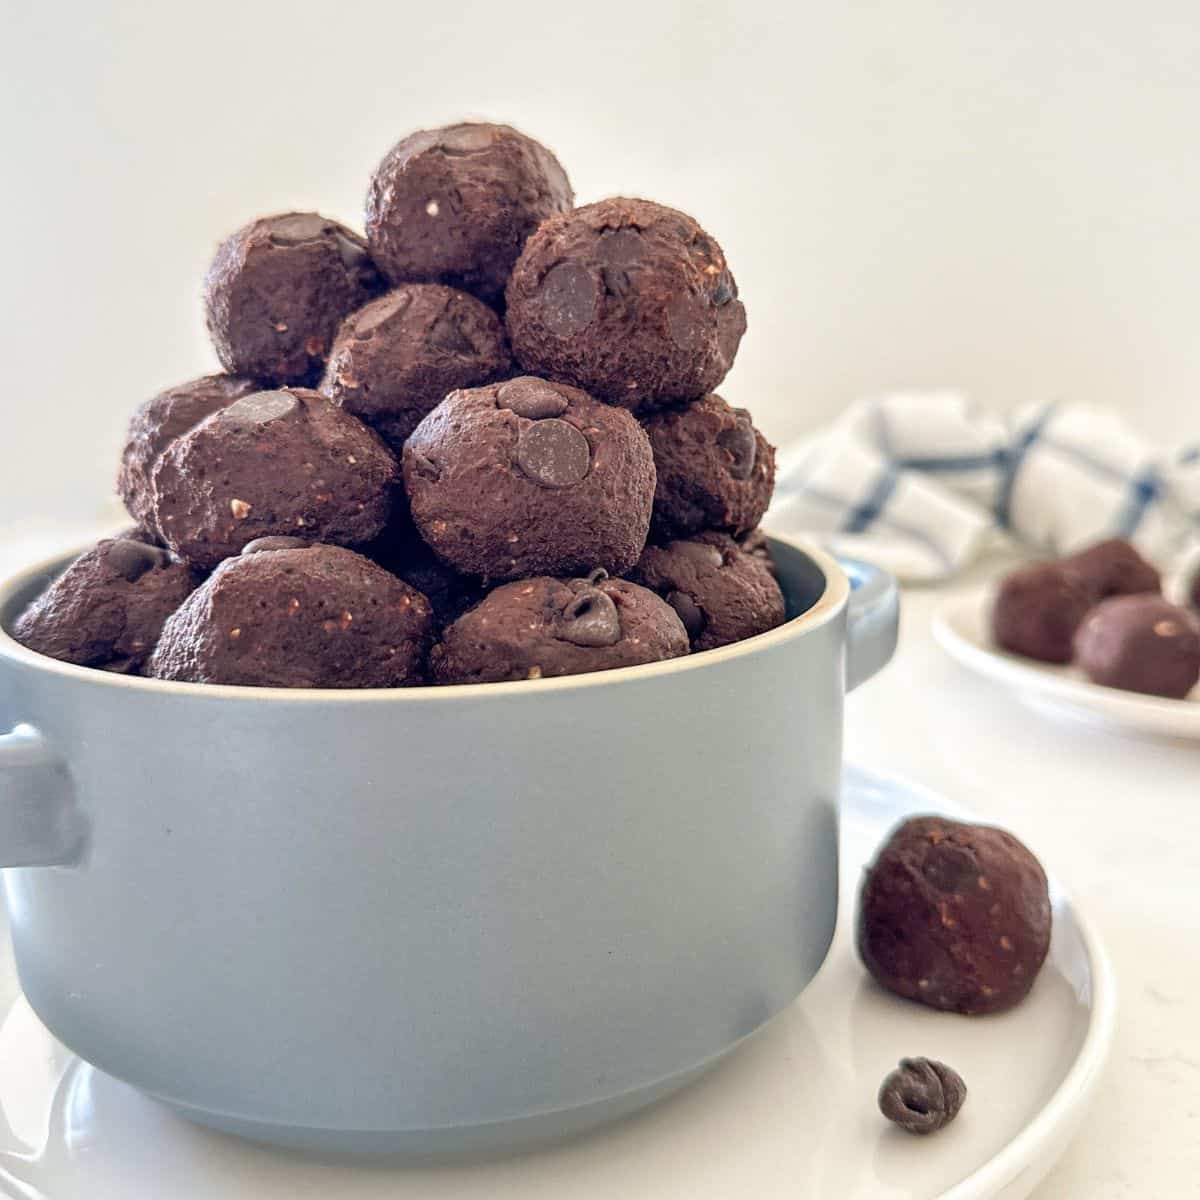 Double chocolate bliss balls stacked inside blue serving bowl.